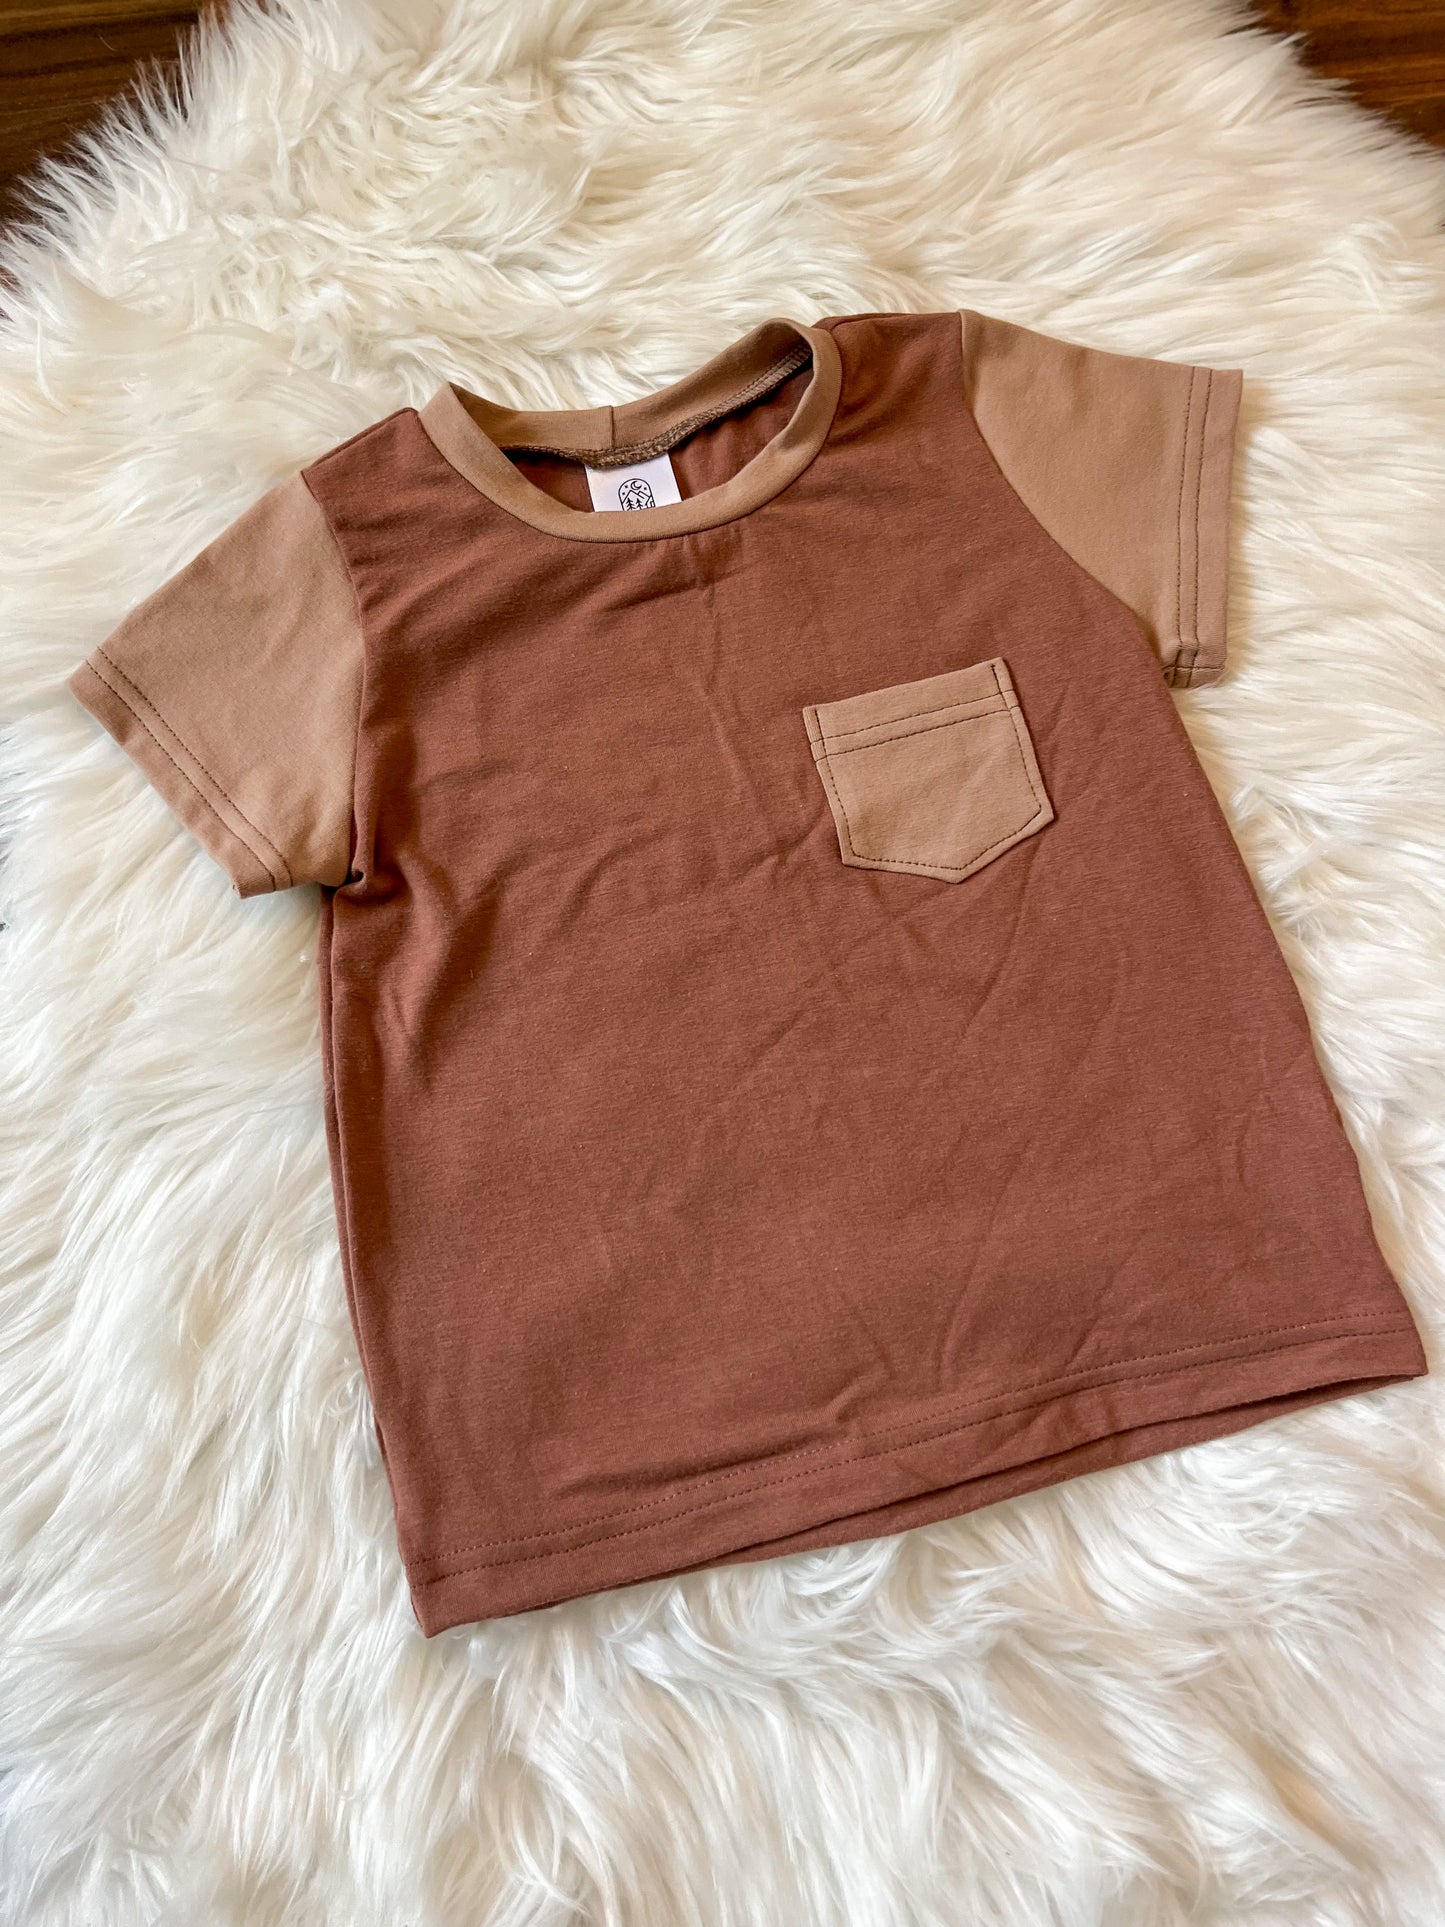 Pocket Tee - Earth and Latte